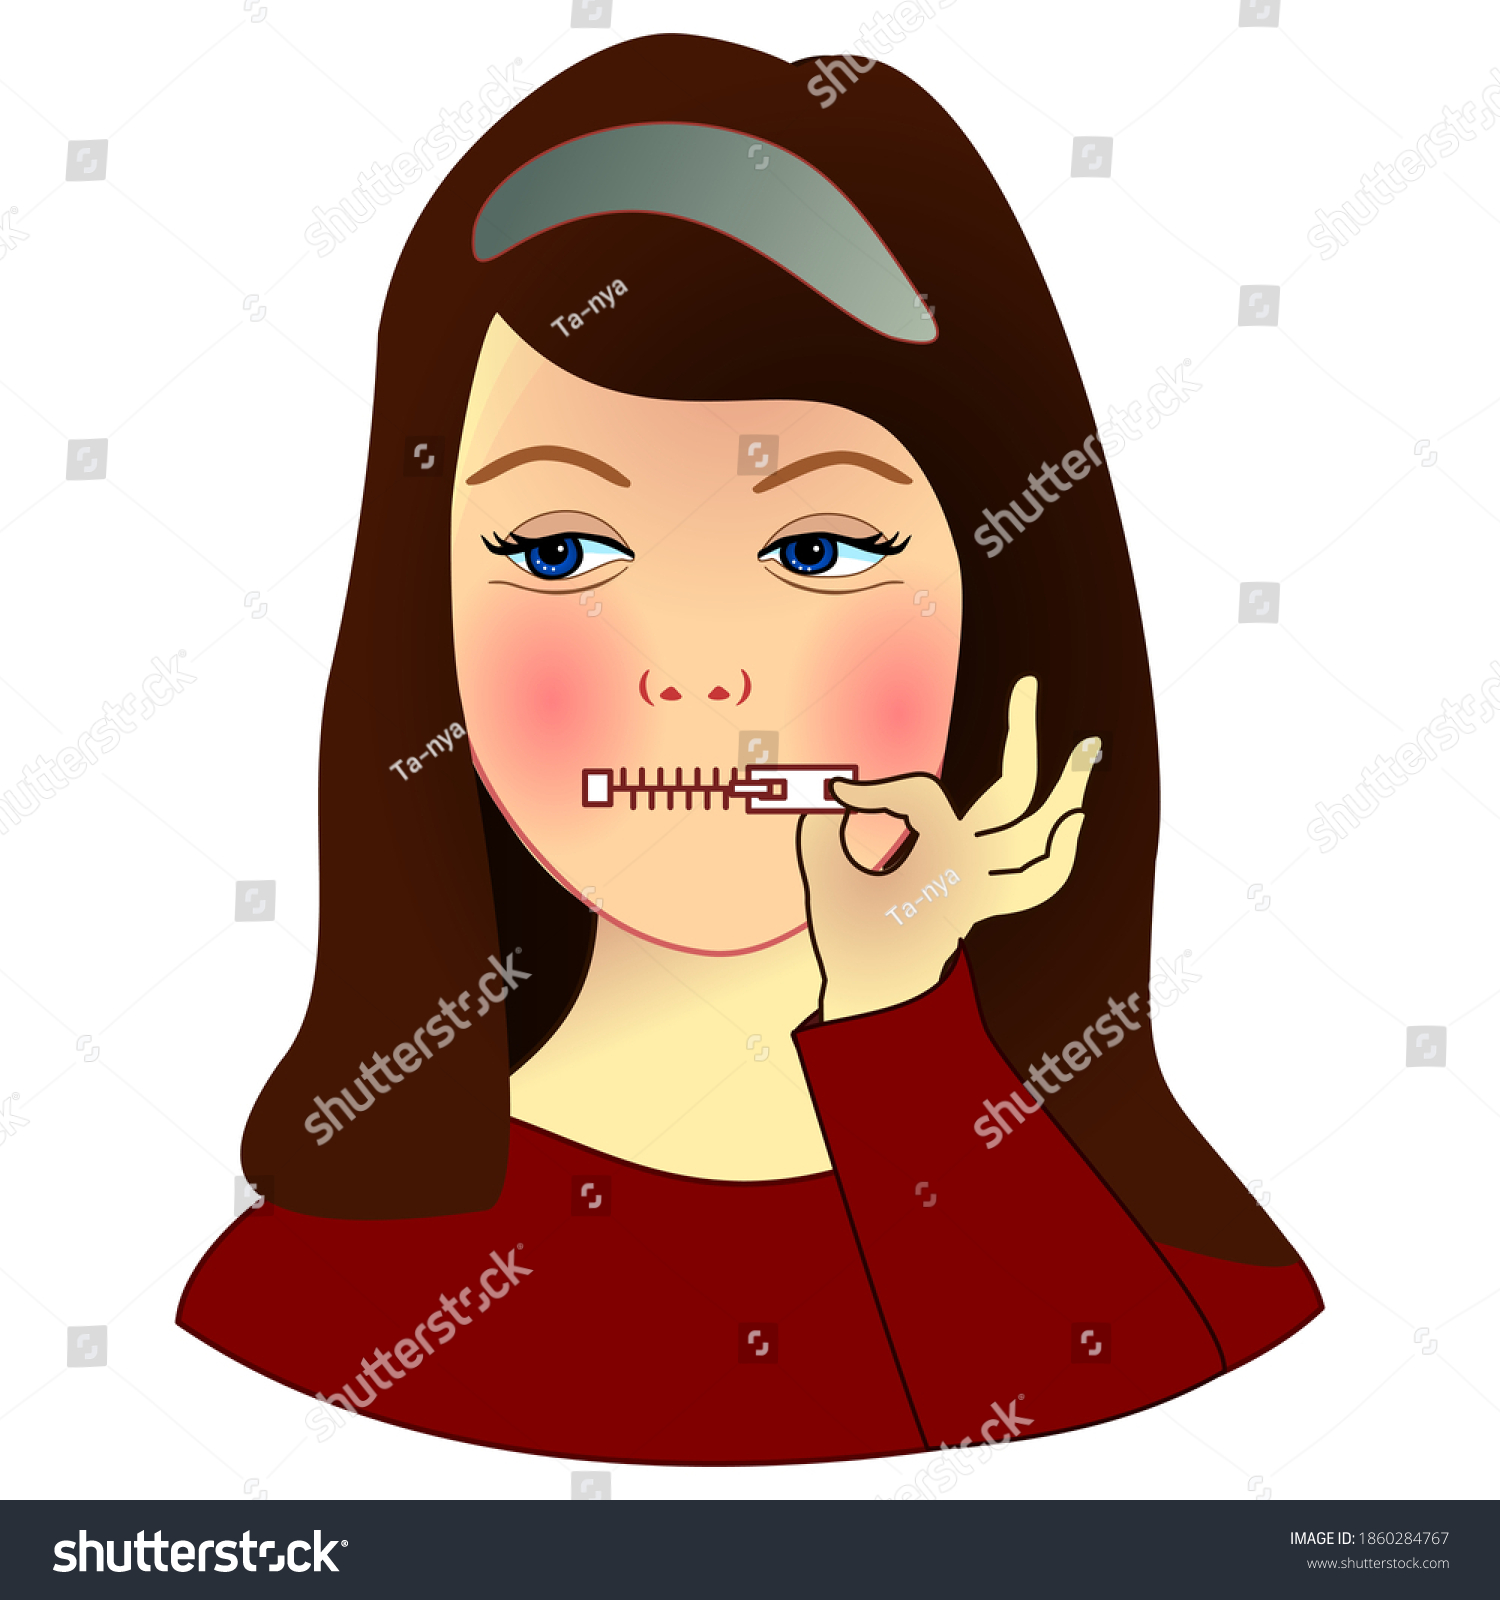 Girl Keeps His Mouth Shut By Closing The Zipper Royalty Free Stock Vector 1860284767